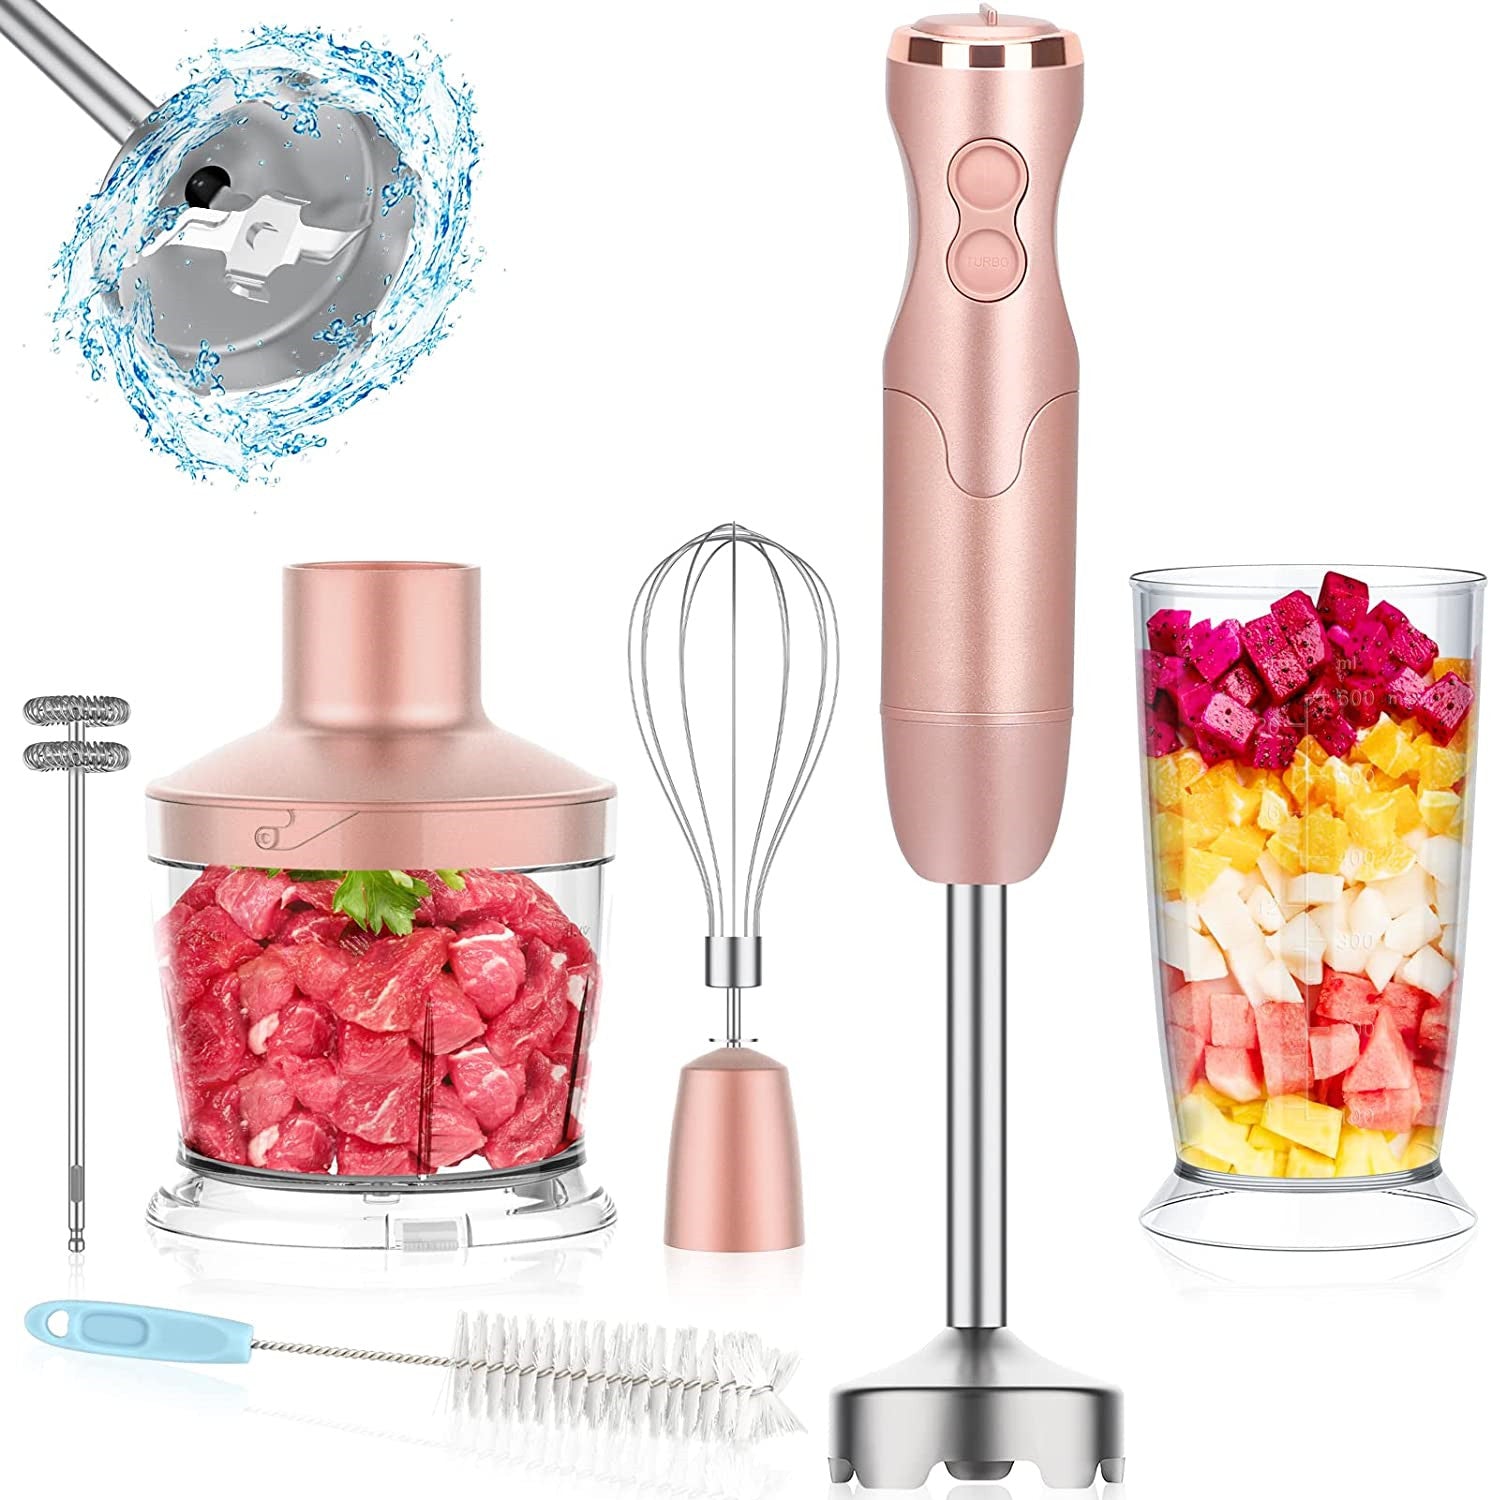 5-in-1 Immersion Hand Blender, Powerful 12-Speed Handheld Stick Blender with 304 Stainless Steel Blades, Chopper, Beaker, Whisk and Milk Frother for Smoothie, Baby Food, Sauces Red,Puree, Soup (Golden Pink)